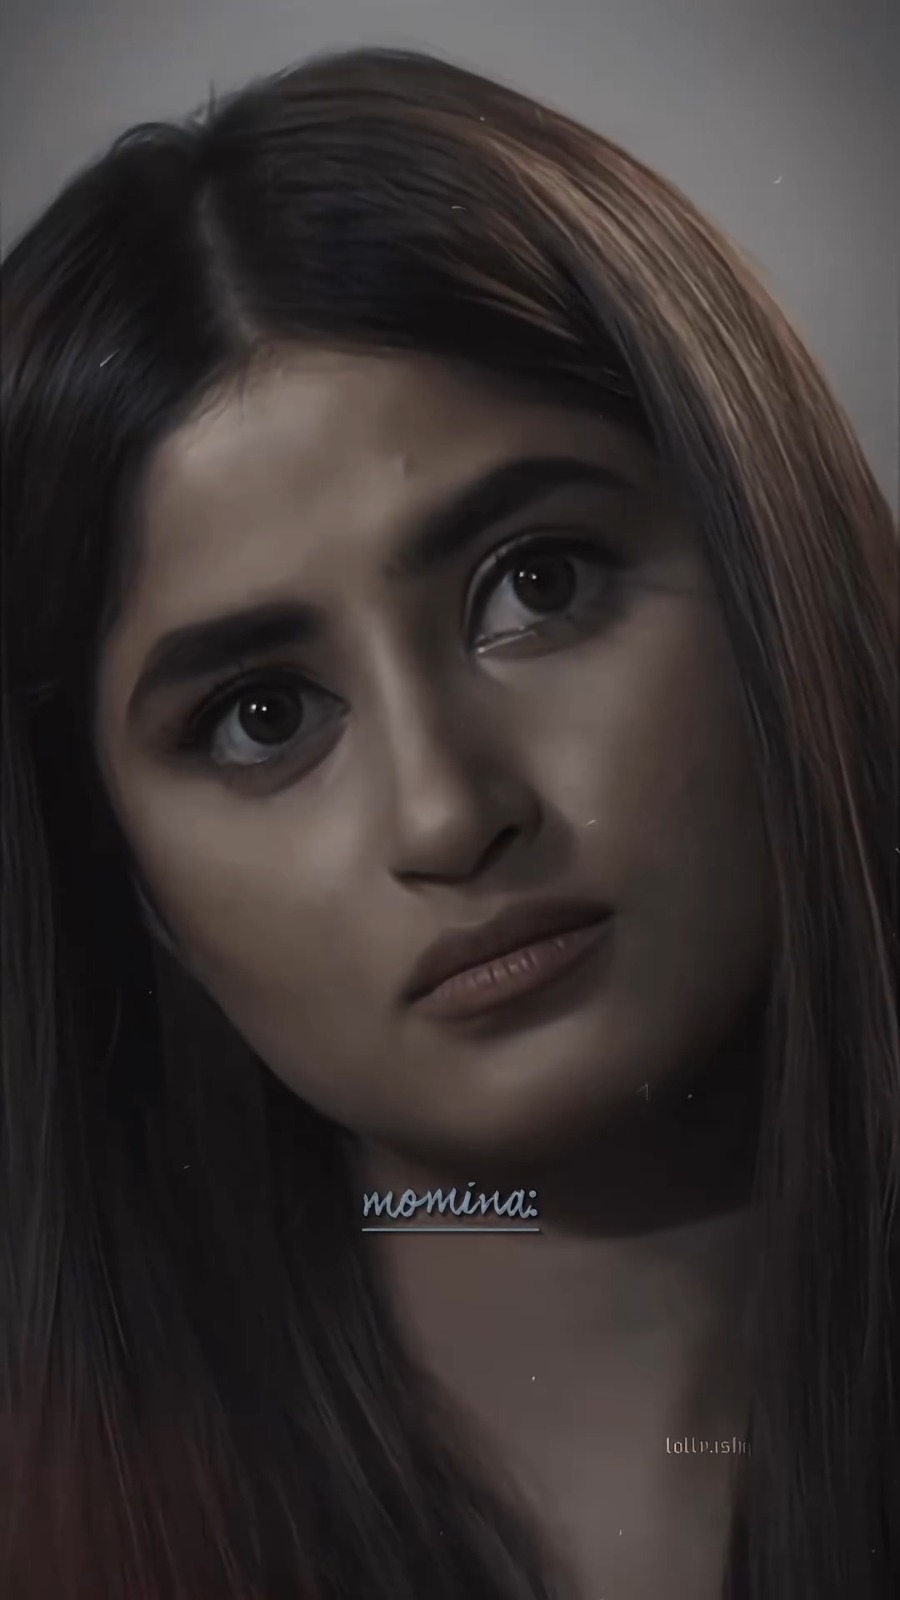 sajal as momina is something I’ll never move on from.🤍